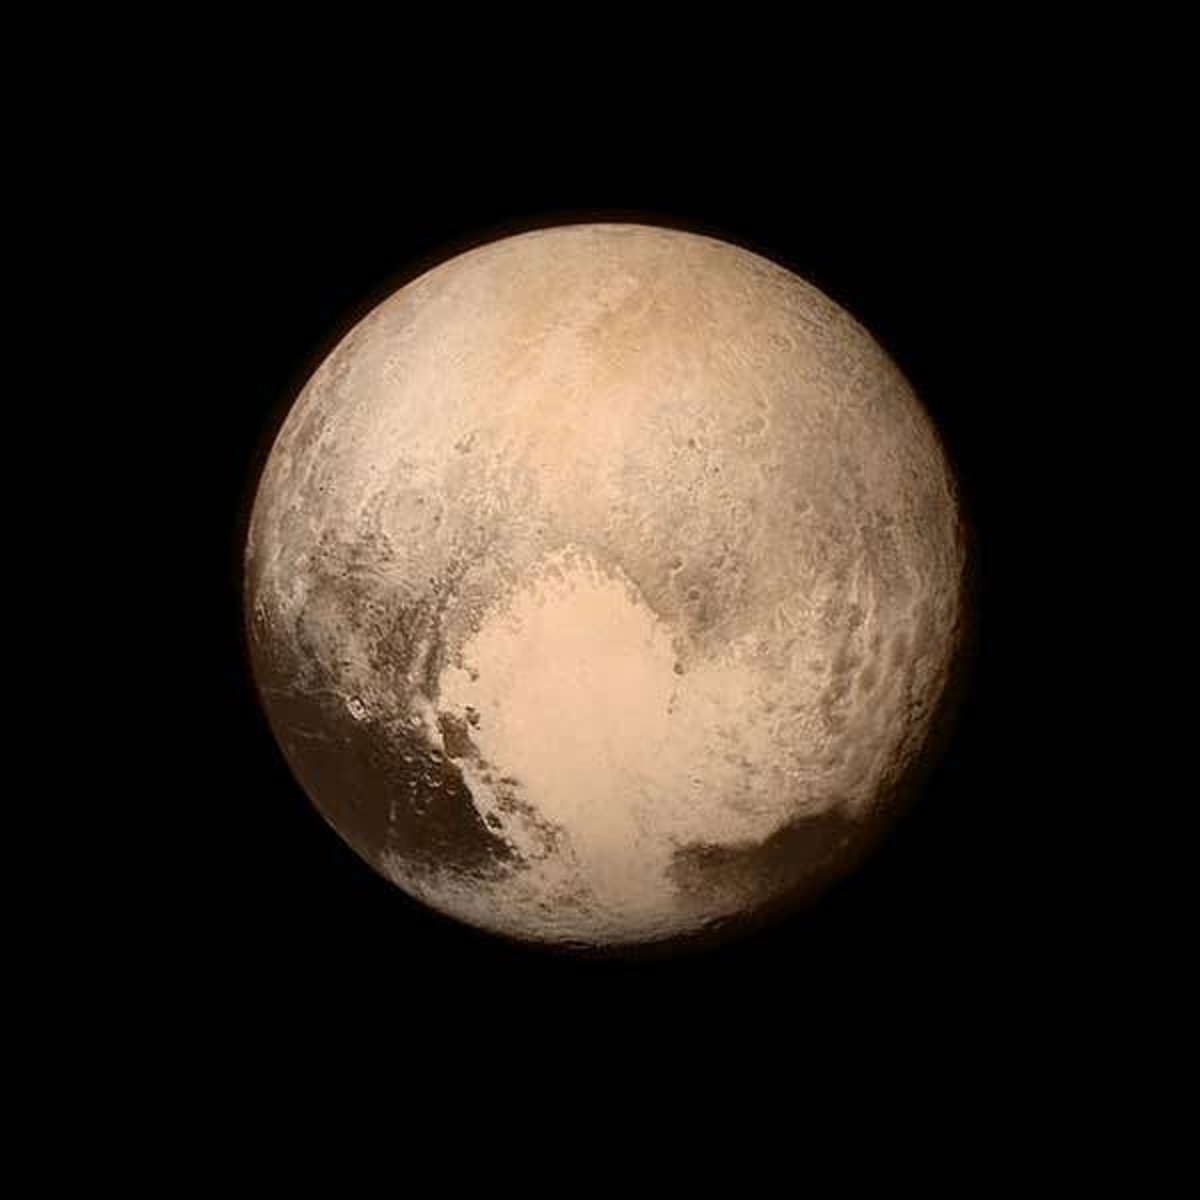 Picture of Pluto taken in 2015.